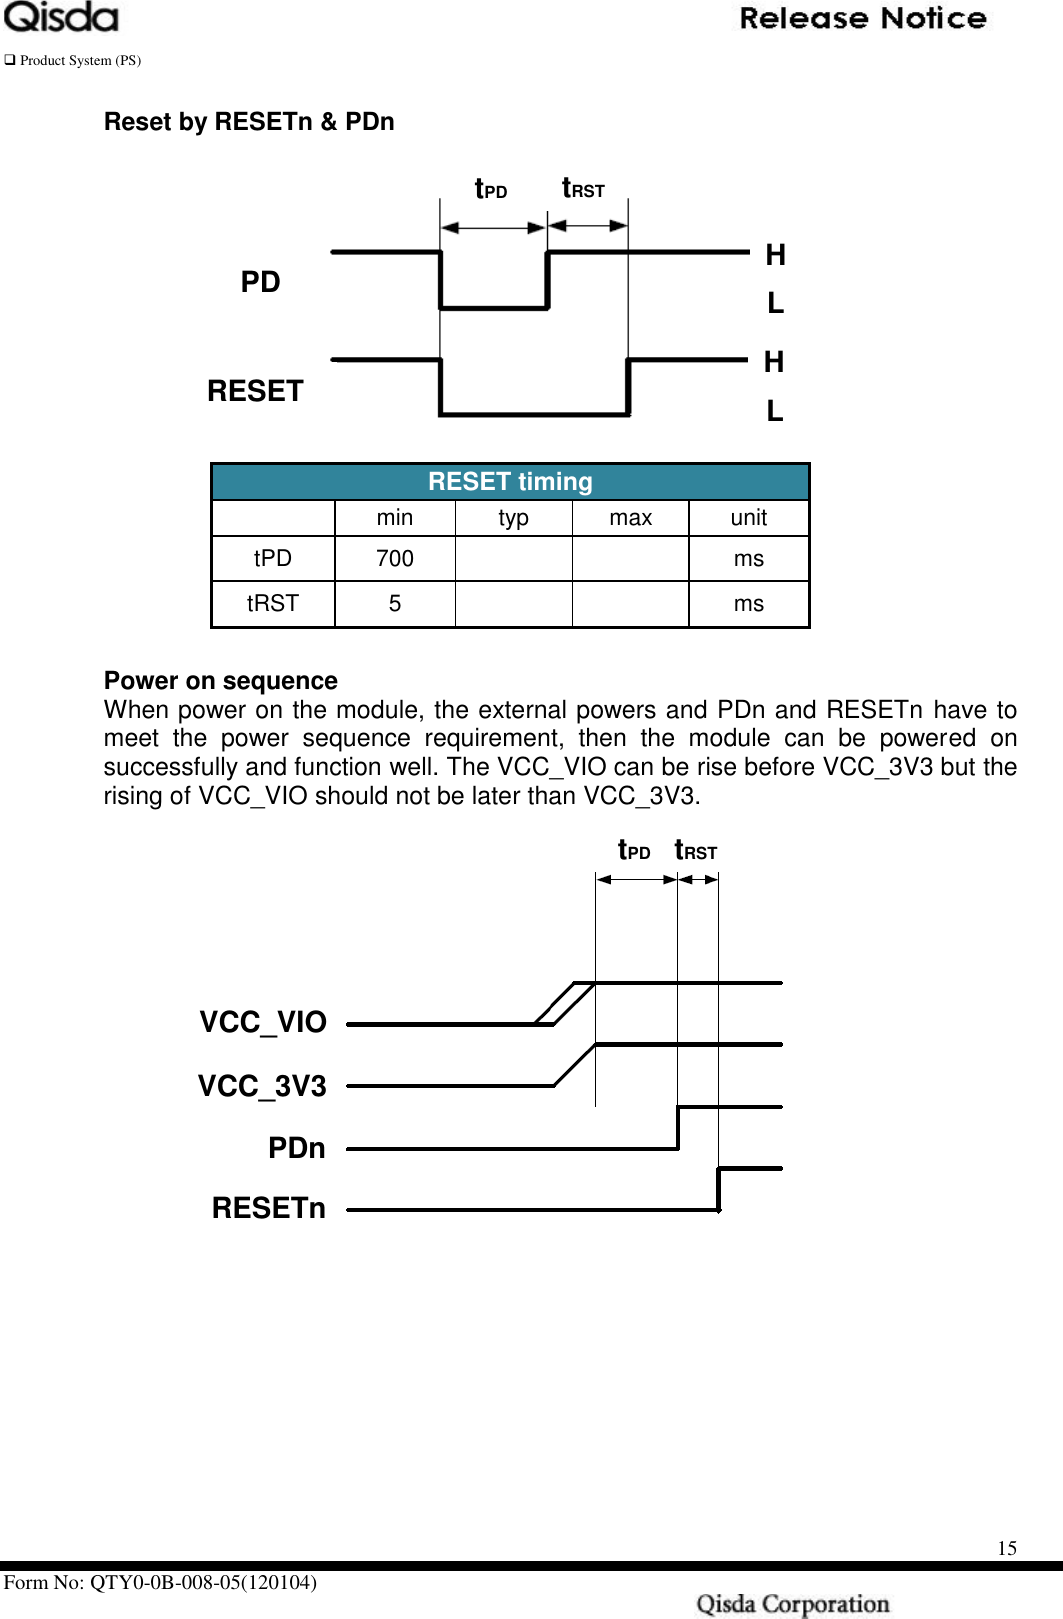   Product System (PS)      Form No: QTY0-0B-008-05(120104)                                                    15 Reset by RESETn &amp; PDn    RESET timing   min typ max unit tPD 700     ms tRST 5     ms  Power on sequence When power on the module, the external powers and PDn and RESETn have to meet  the  power  sequence  requirement,  then  the  module  can  be  powered on successfully and function well. The VCC_VIO can be rise before VCC_3V3 but the rising of VCC_VIO should not be later than VCC_3V3.      EESETn PDn H       L       H       L       tRST      tPD      RESETn PDn H   L    H   L    tRST      tPD      PDn RESETn VCC_VIO VCC_3V3 